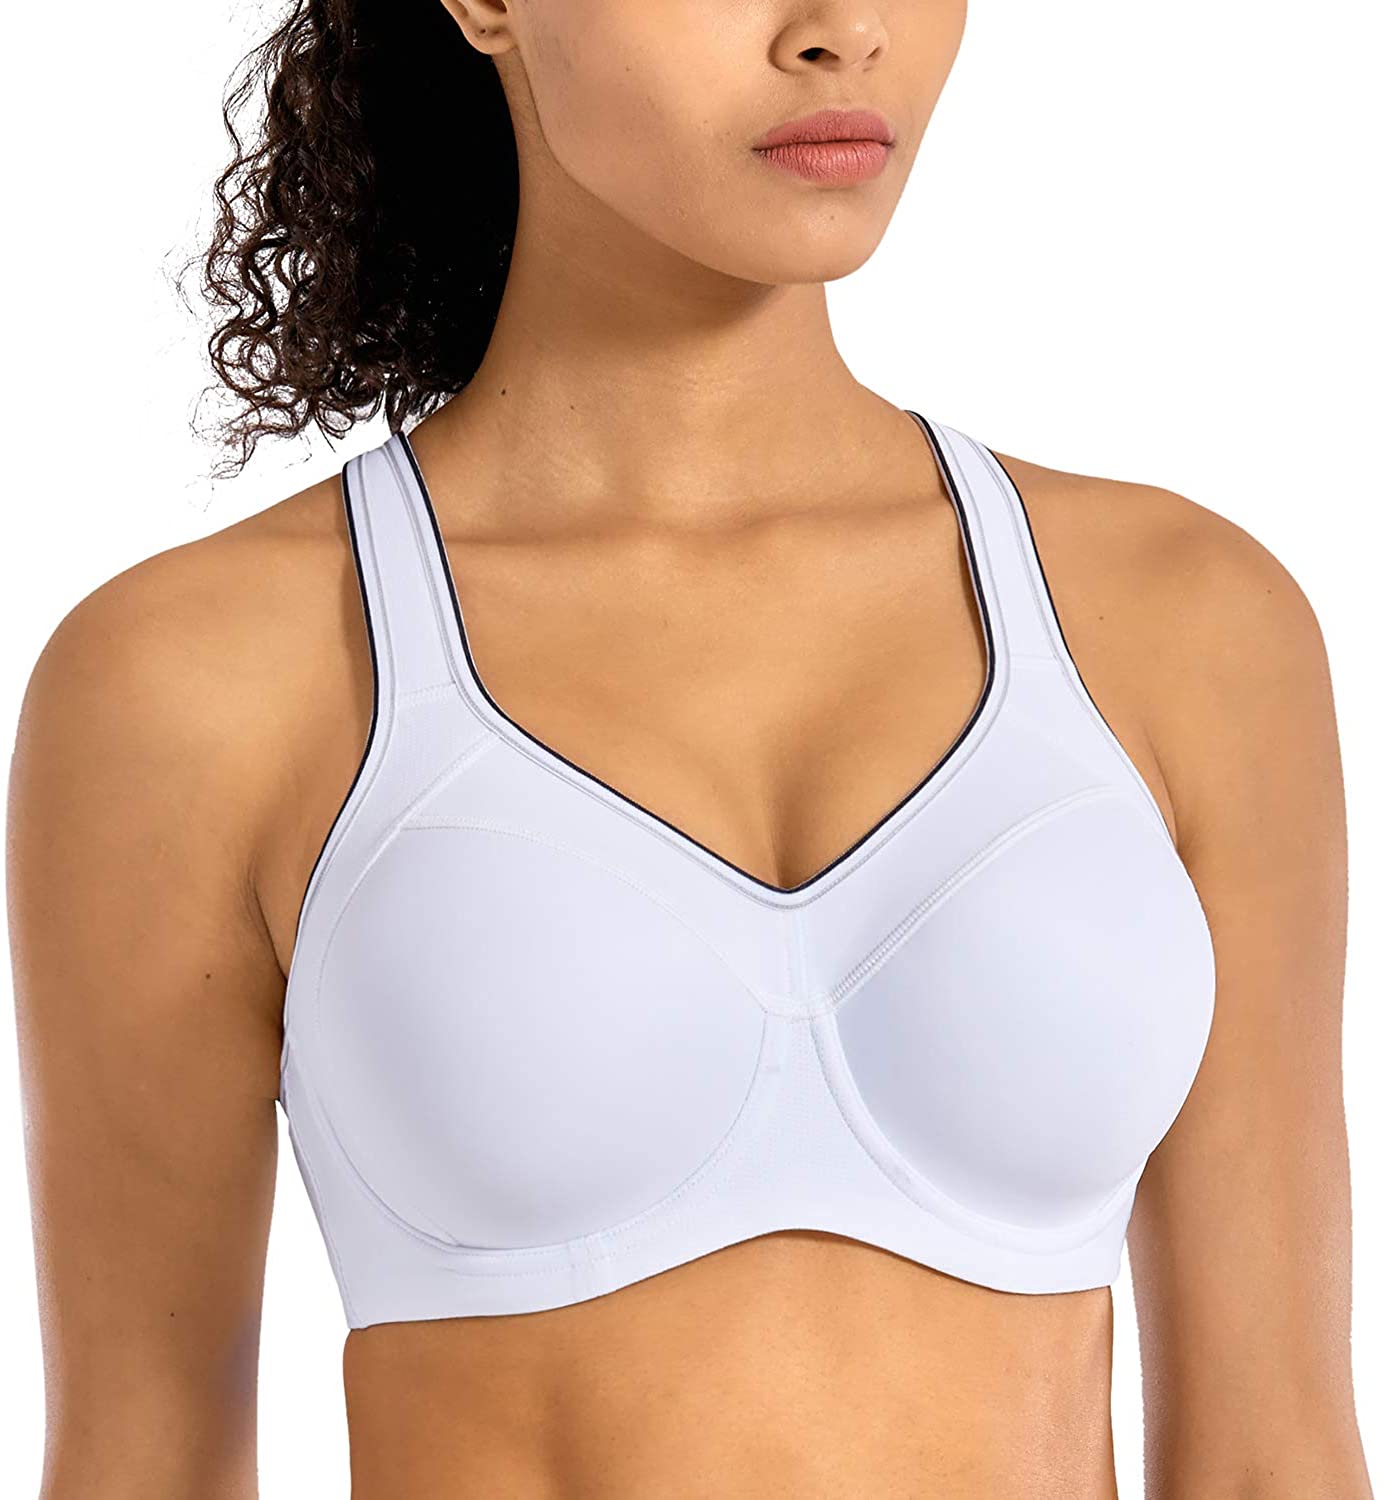 Price:$21.99 SYROKAN Women's Full Support High Impact Racerback Lightly Lined Underwire Sports Bra at Amazon Women’s Clothing store